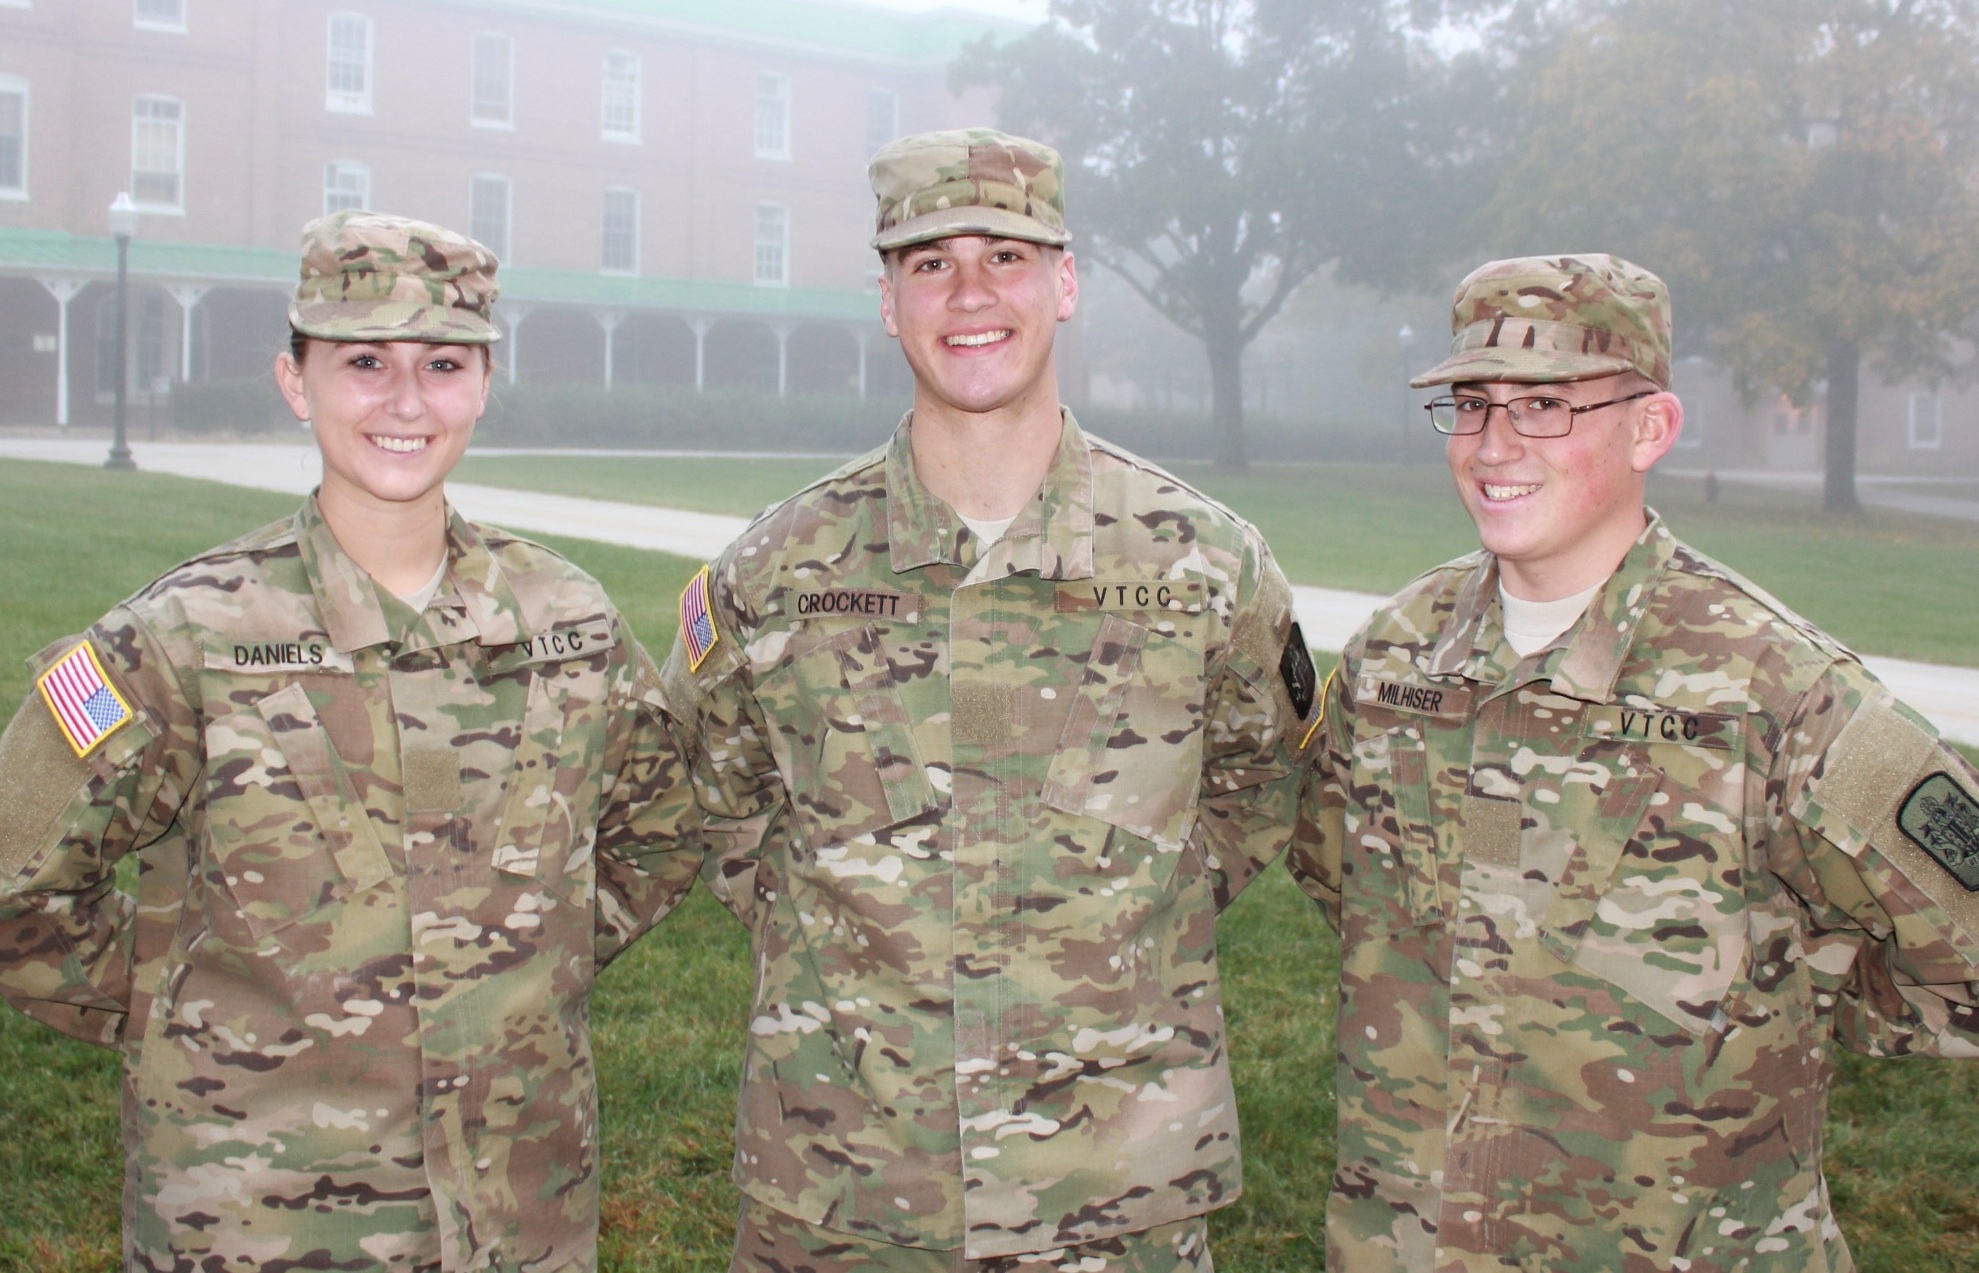 From left to right are Cadets Rachel Daniels, John Crockett, and Gregory Milhiser standing on the Upper Quad.